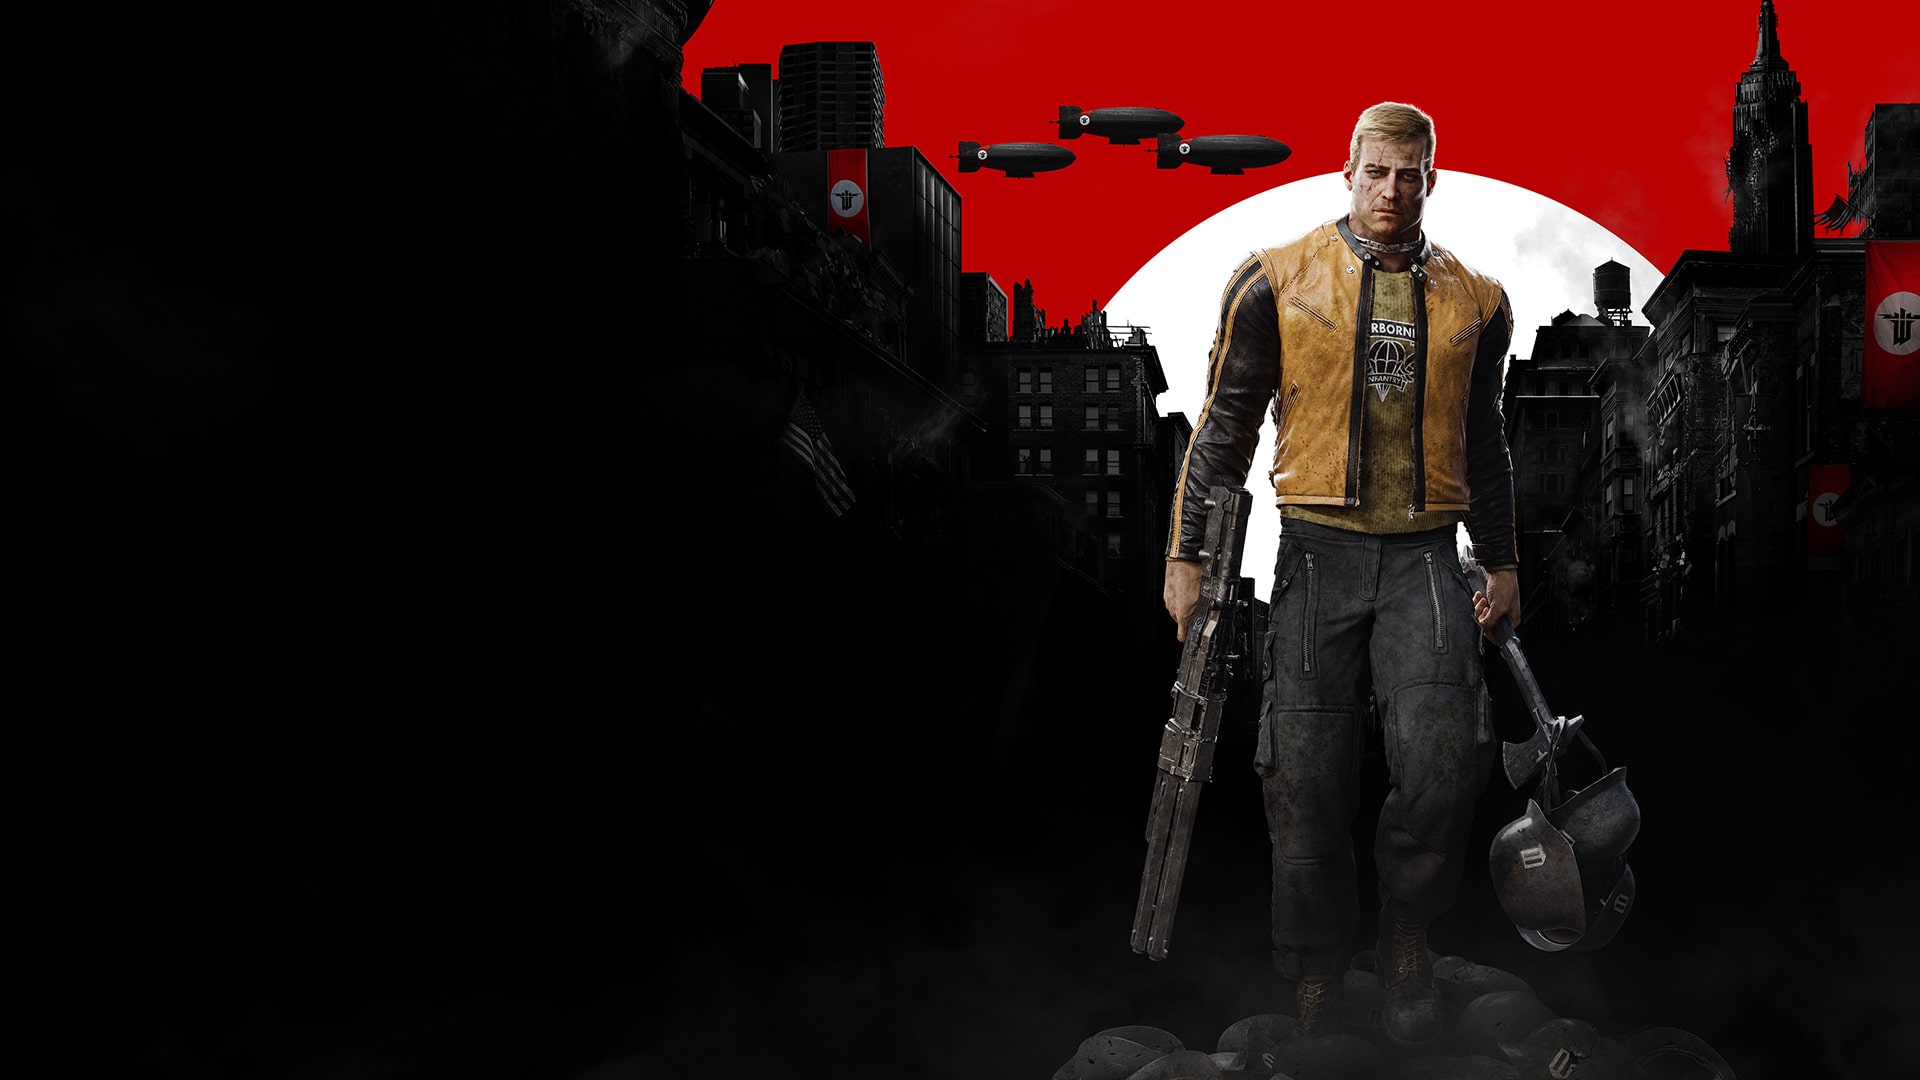 Wolfenstein ii the new colossus dump. Wolfenstein II: the New Colossus. Wolfenstein 2 the New Colossus. Wolfenstein Колоссус. Wolfenstein II: the New Colossus обложка.